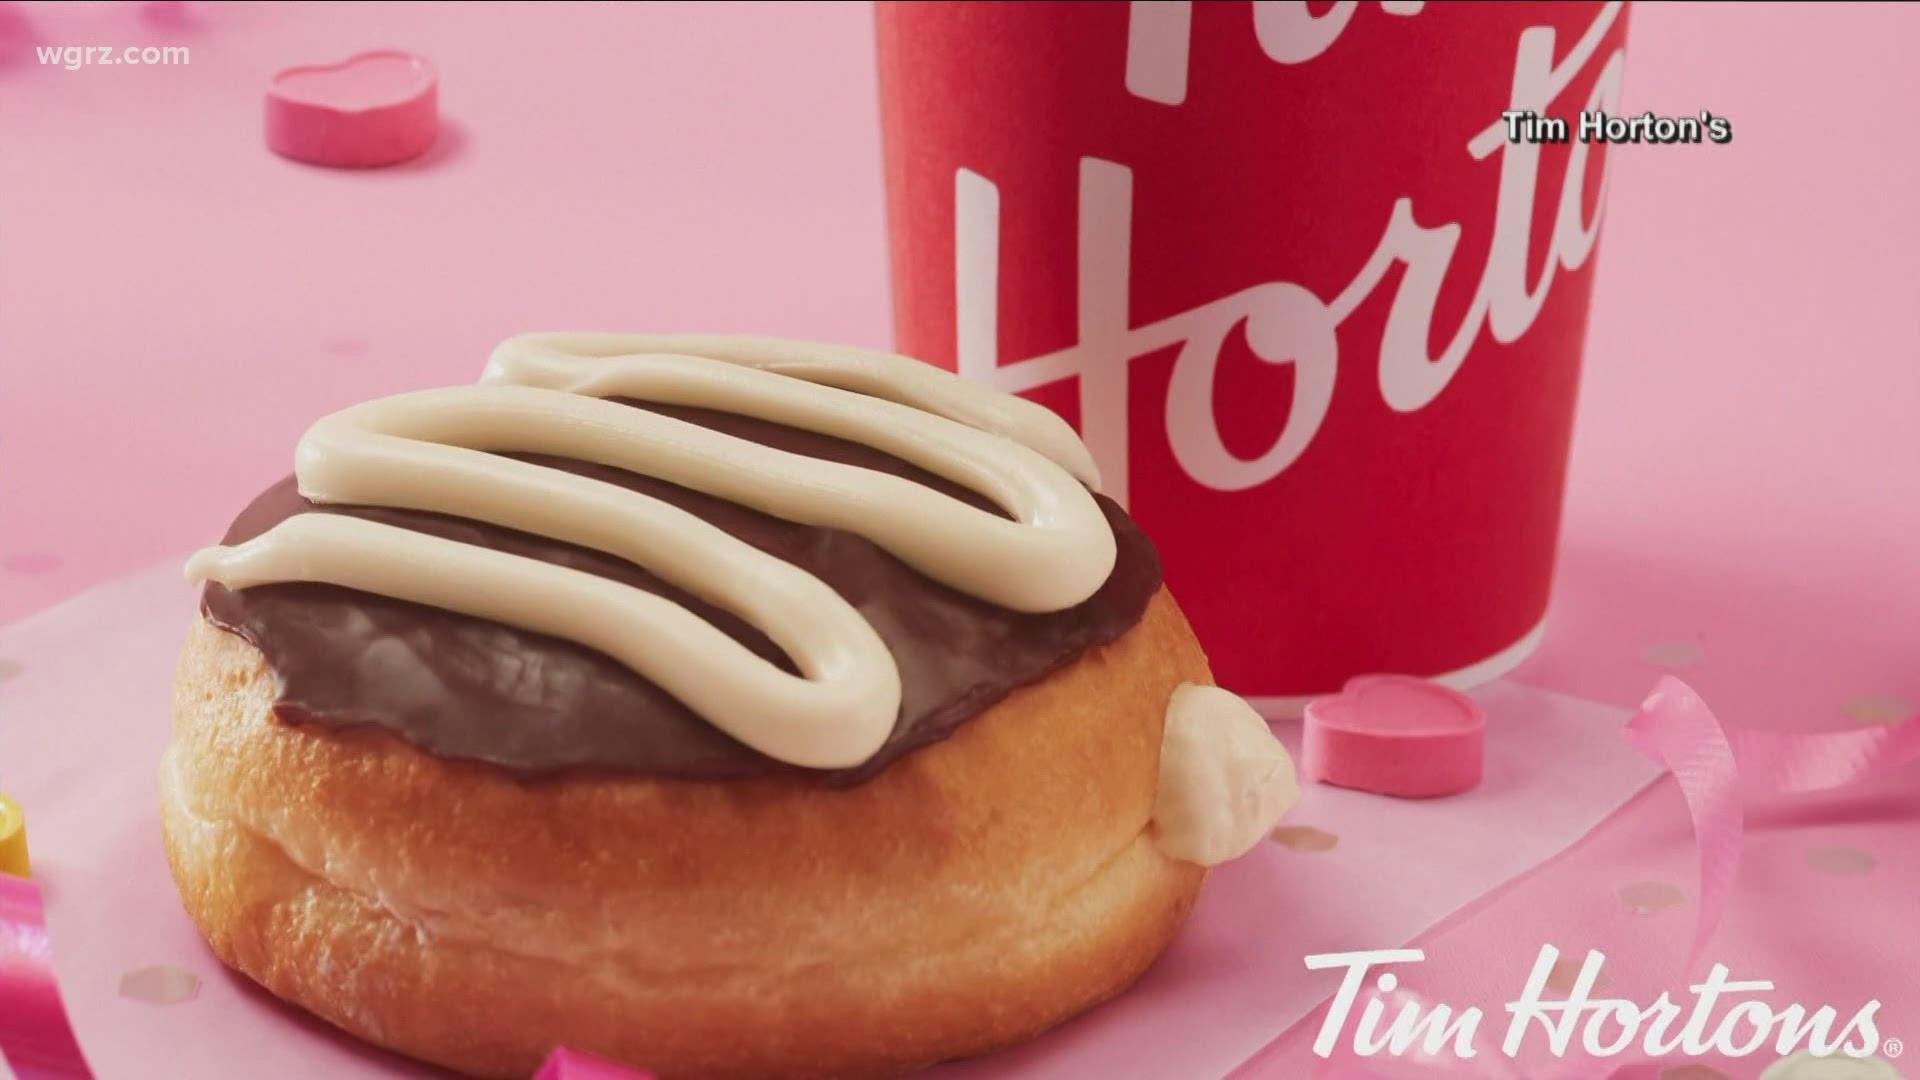 Tim Hortons is sharing the love this weekend with a free donut.